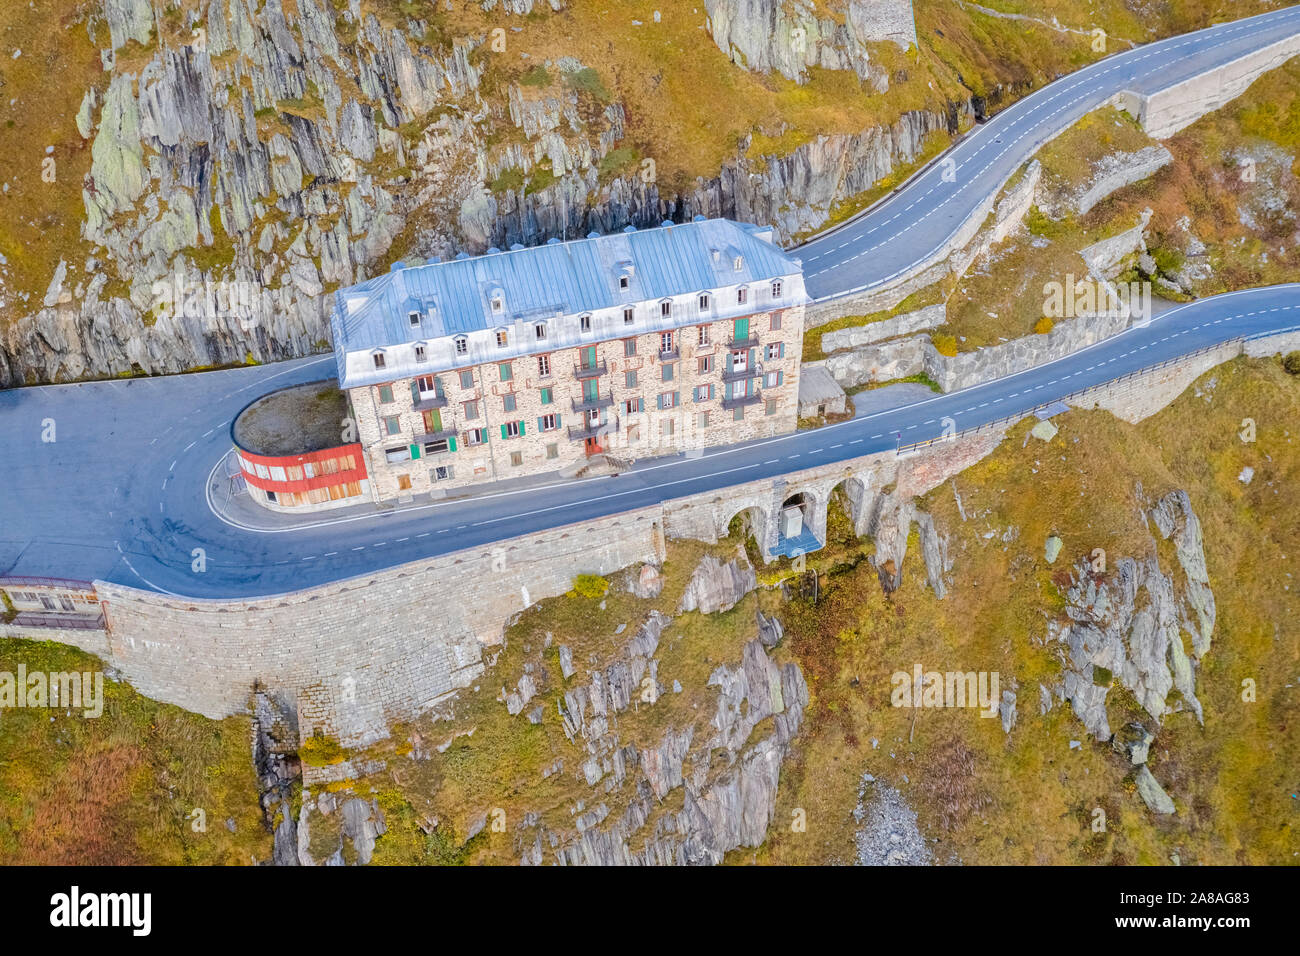 Aerial view of the Belvedere Hotel and the Furka Pass road, Obergoms, Canton of Valais, Swiss Alps, Switzerland. Stock Photo